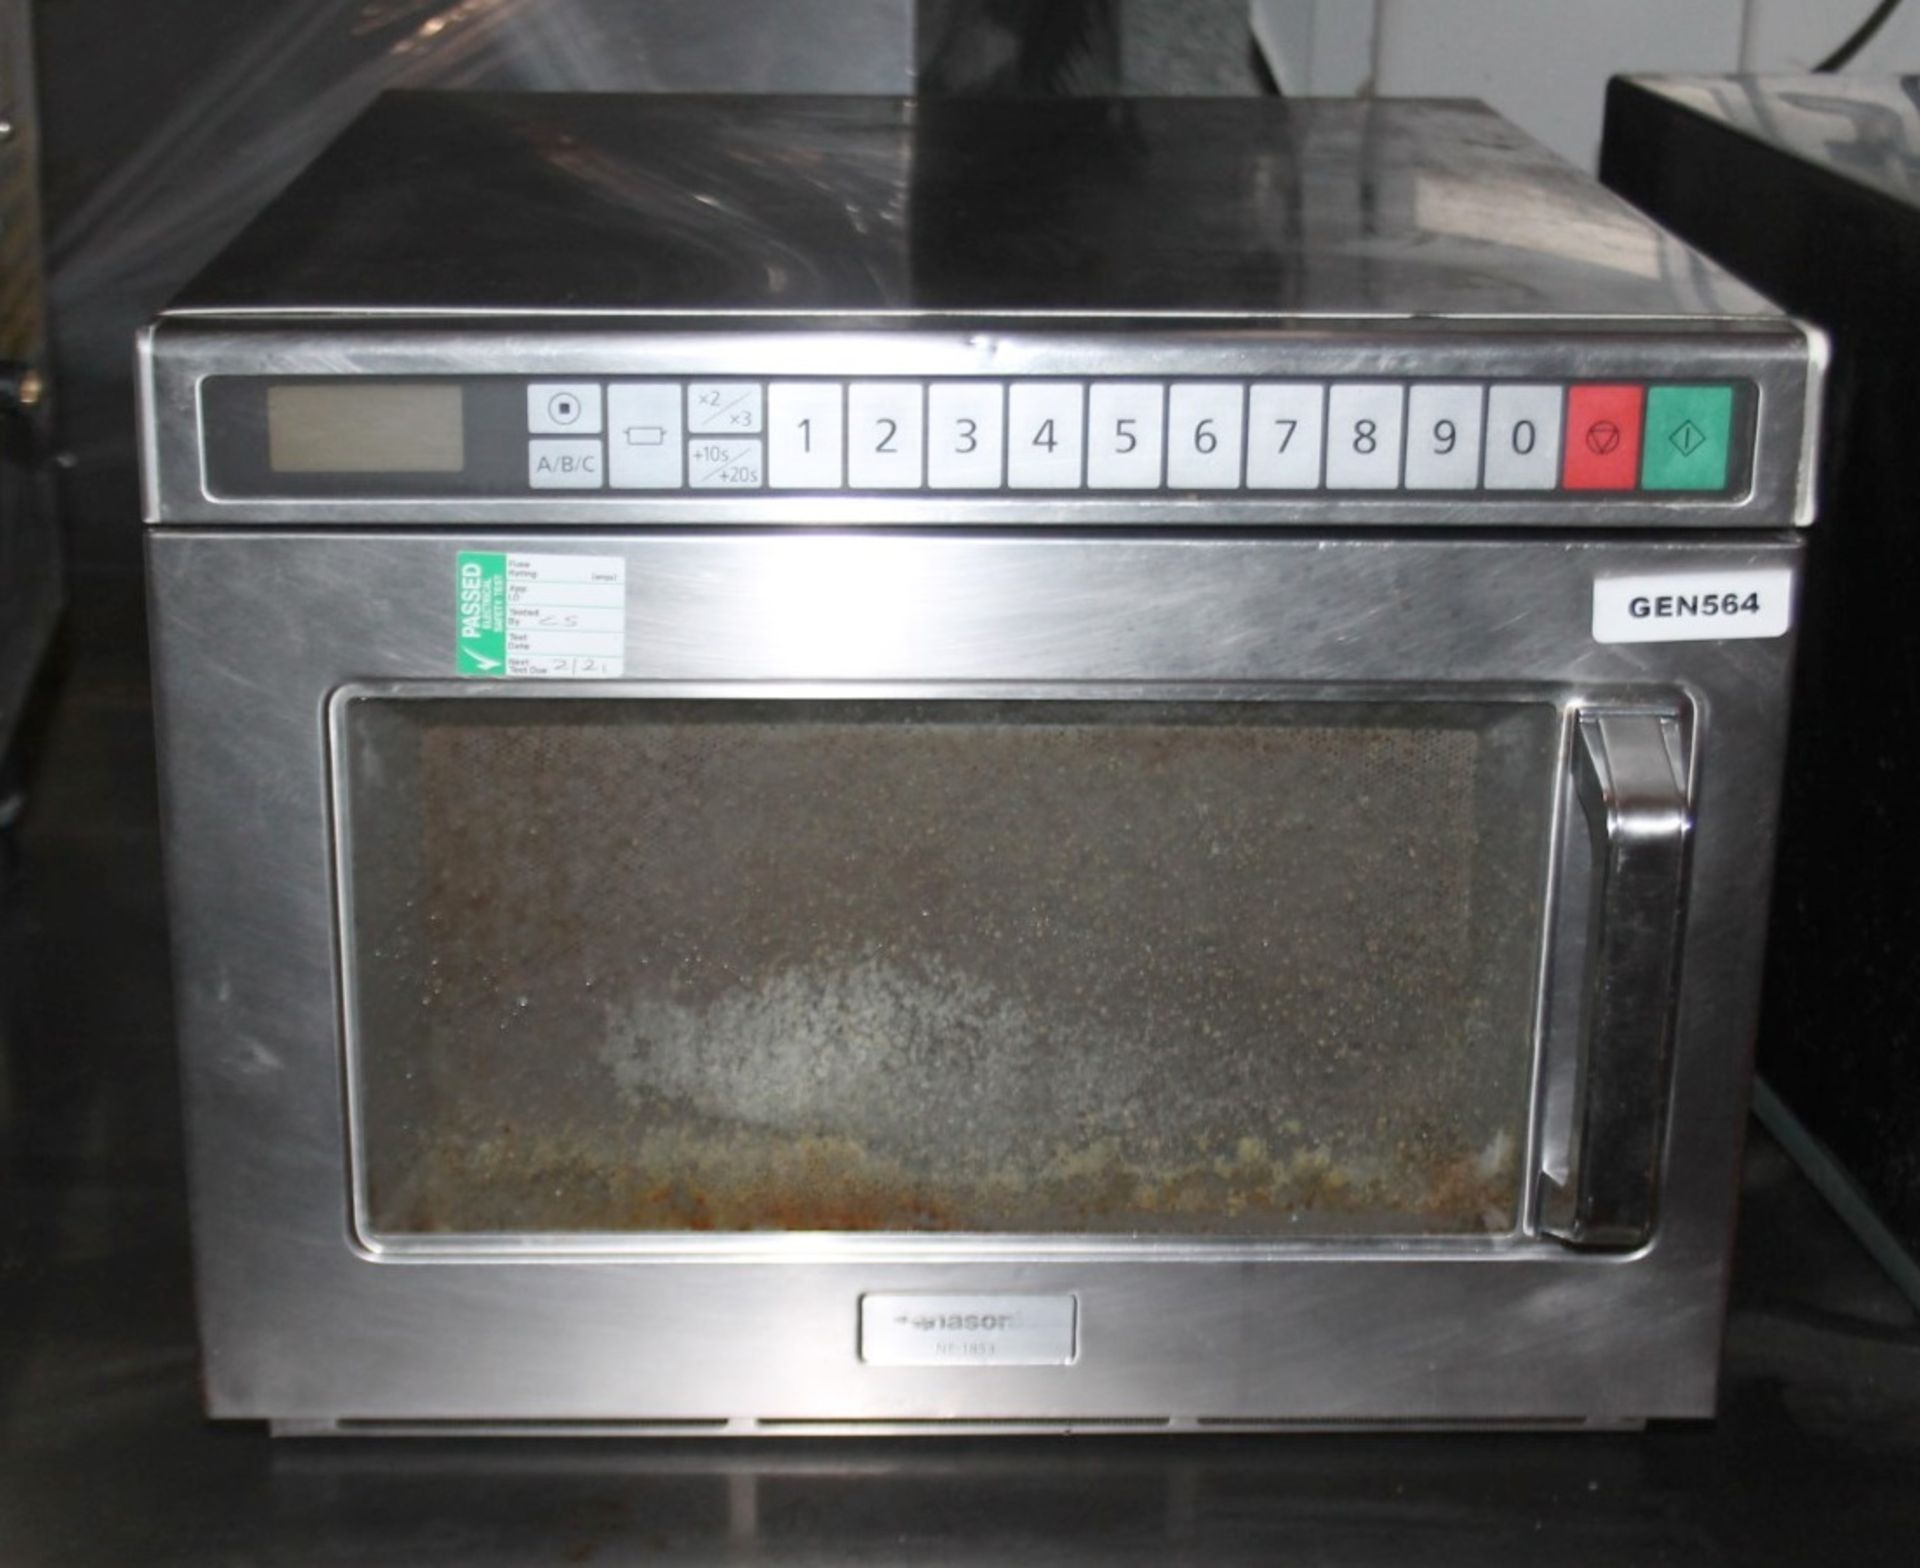 1 x Panasonic Commercial Microwave Oven Featuring A Stainless Steel Exterior And 'Microsave' - Image 2 of 7